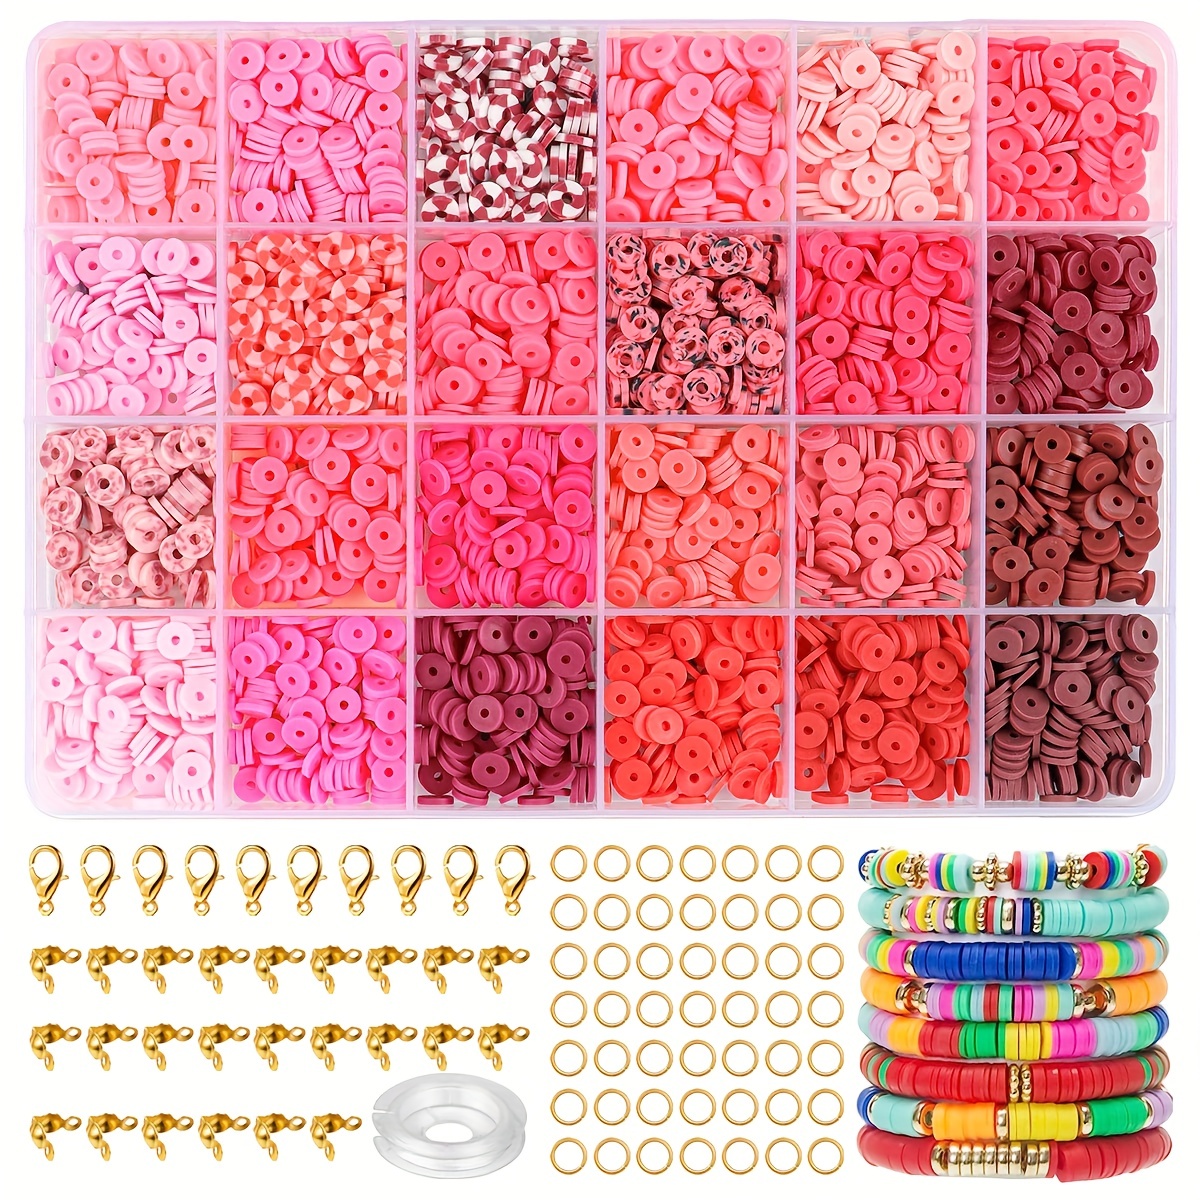 3800 Pcs Fruit Flower Polymer Clay Bead Charms Kit, Cute Smiley Fruit Clay  Beads